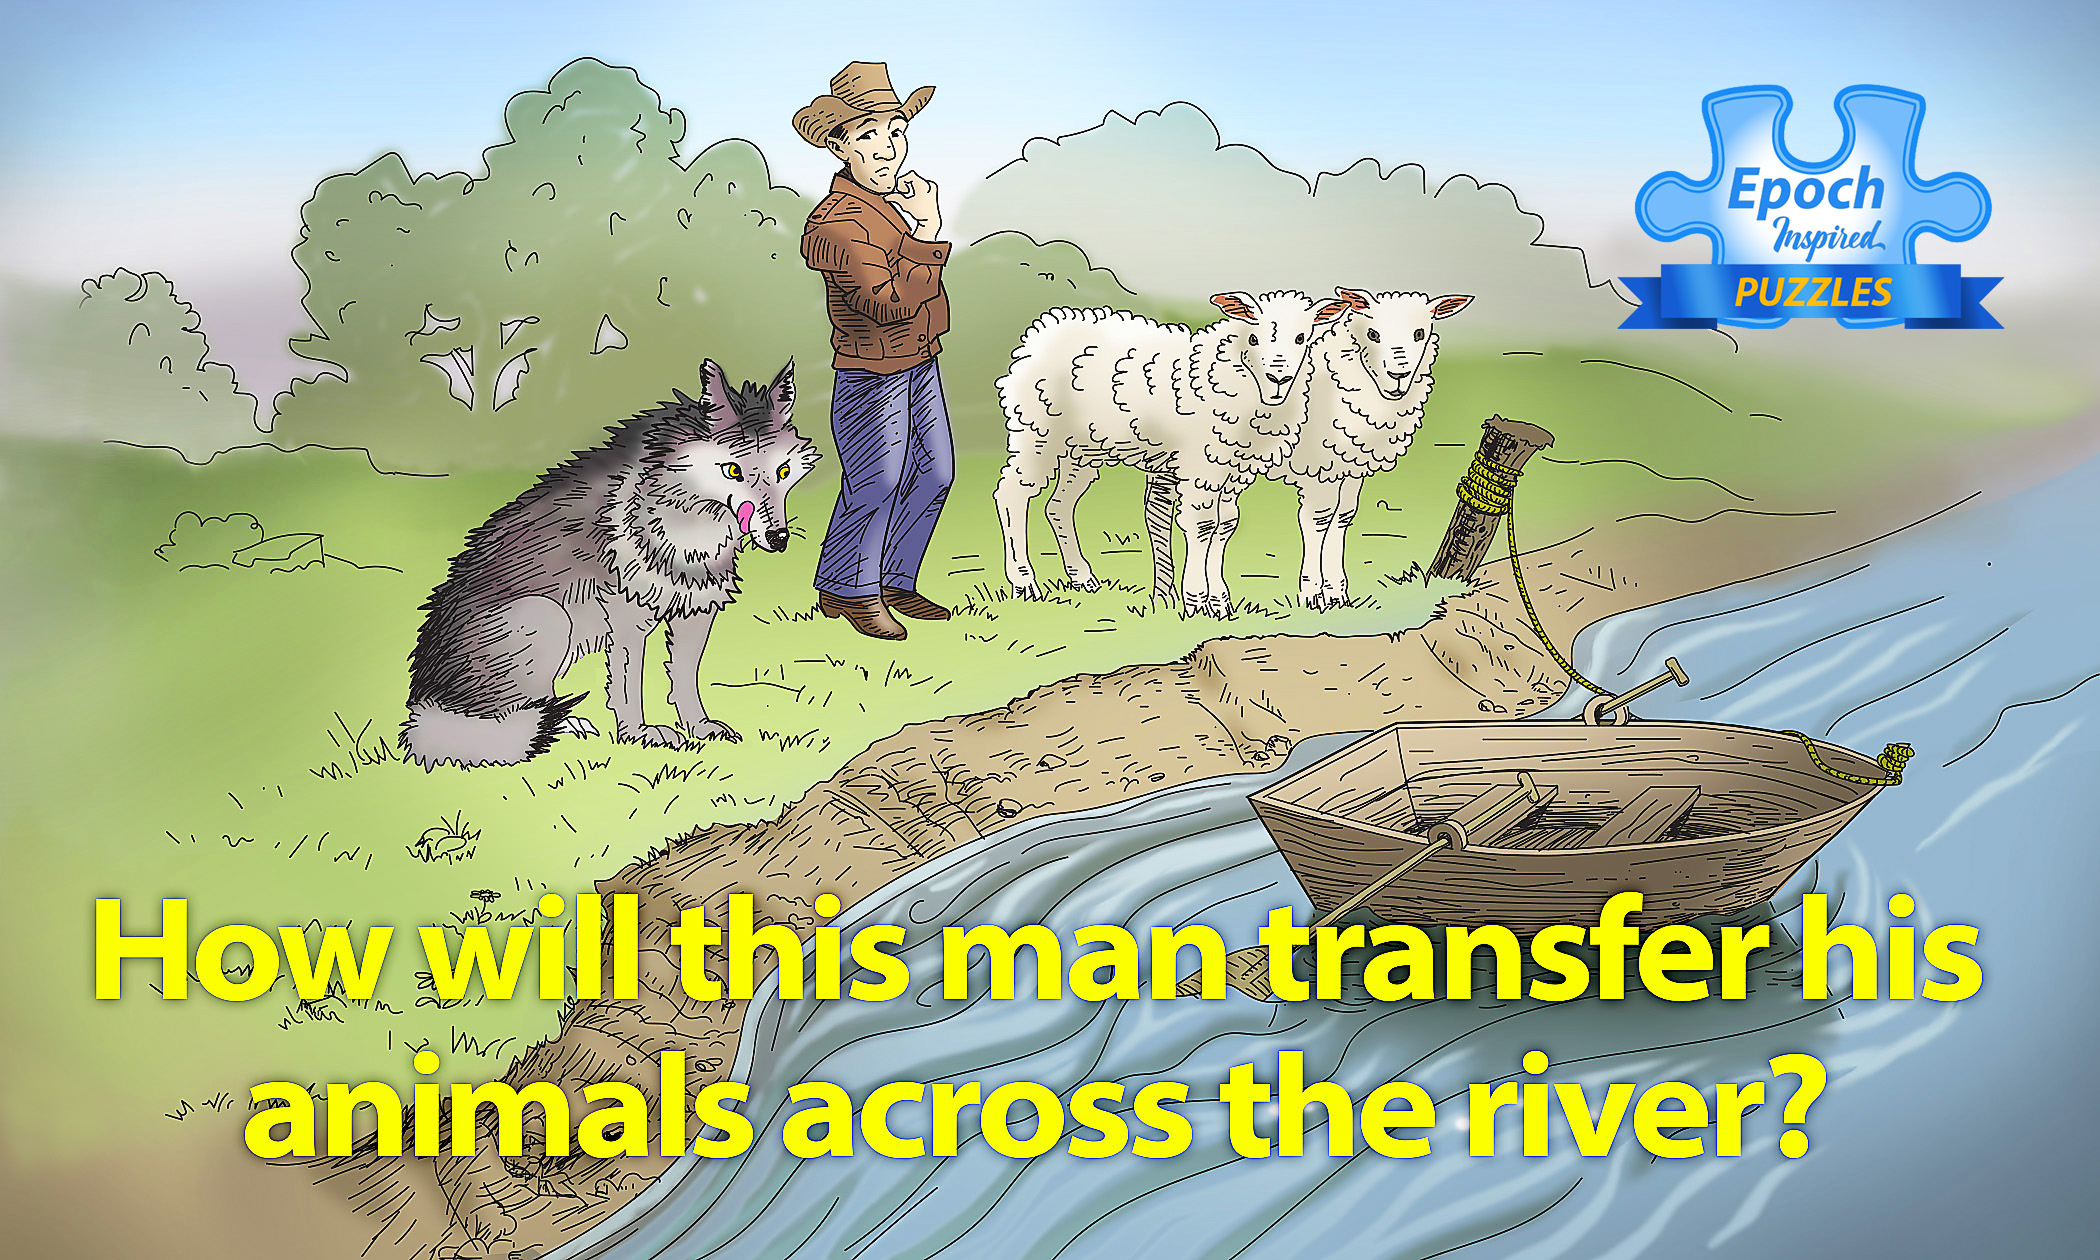 Can You Transfer the Animals Across the River in a Boat That Holds Only 2  at a Time?